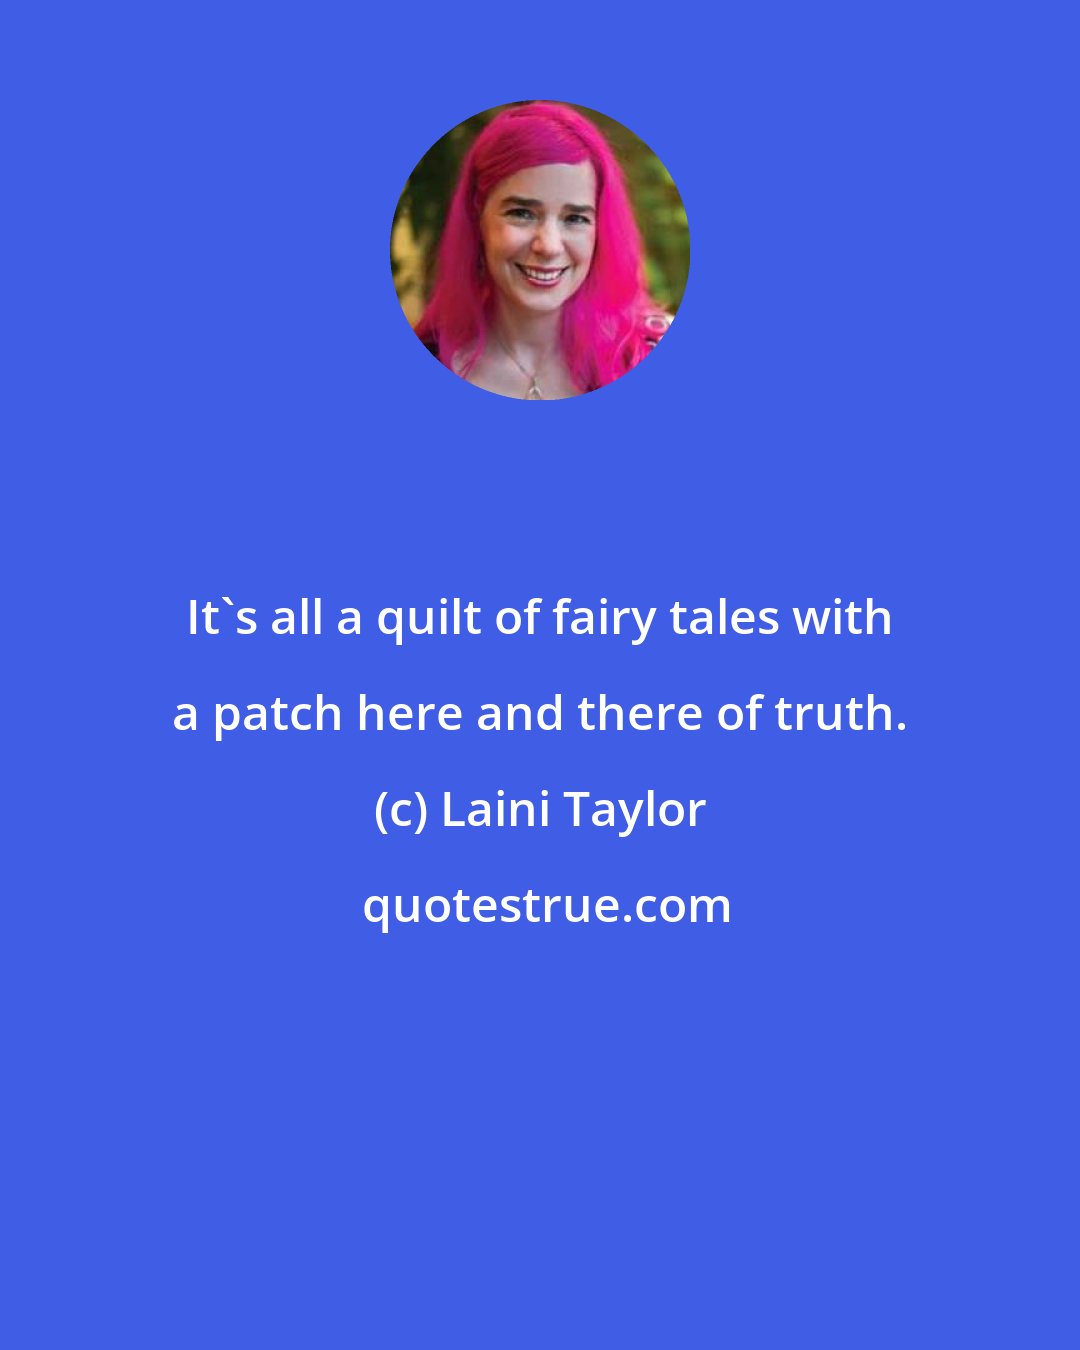 Laini Taylor: It's all a quilt of fairy tales with a patch here and there of truth.